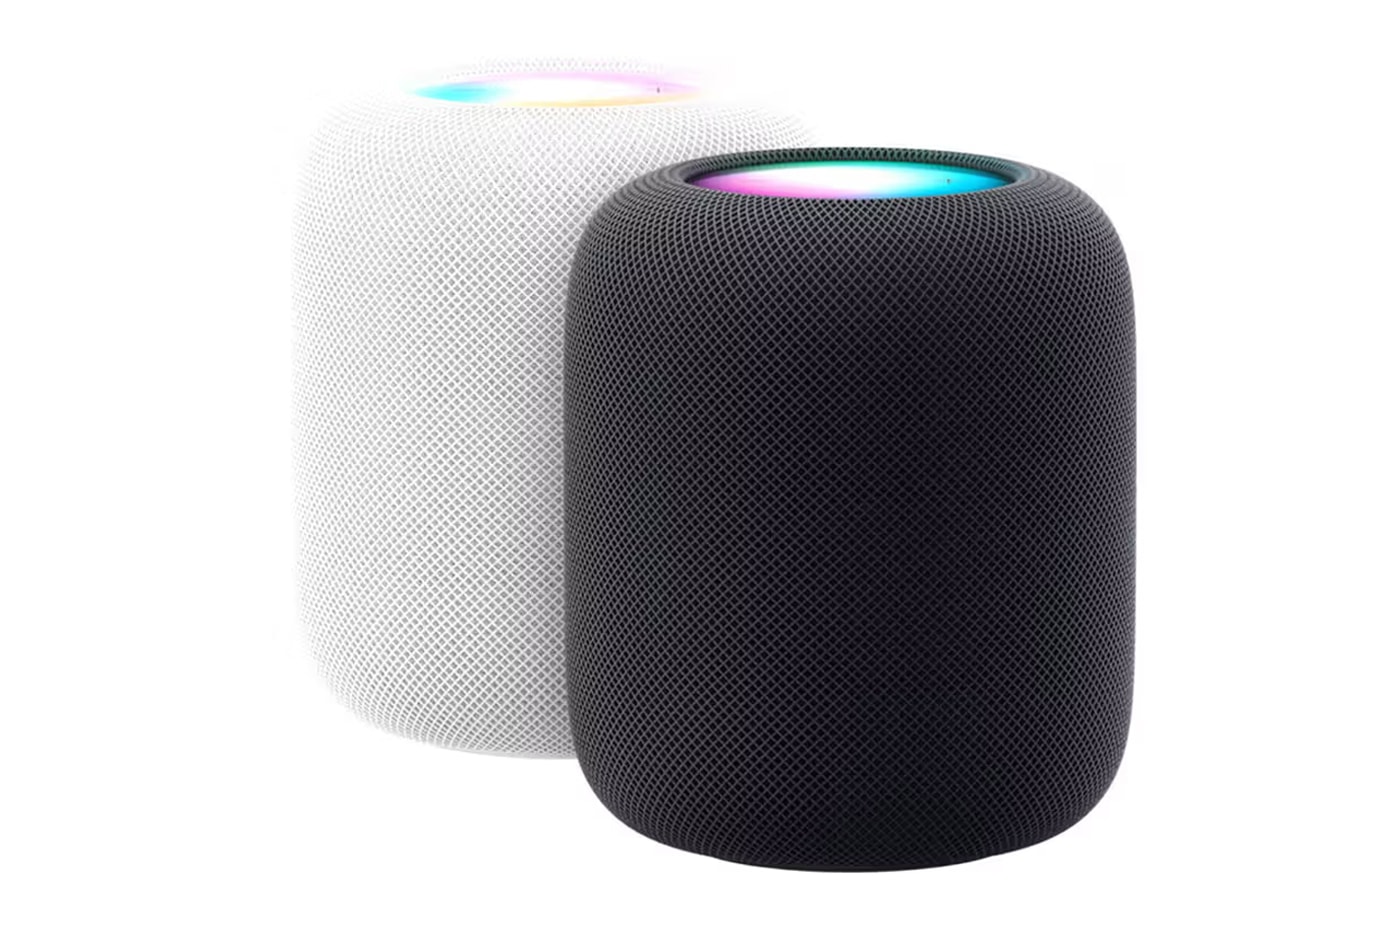 Apple Rumor Report HomePod 7-Inch Screen Panel Manufacturer Tianma iPad Analyst Ming-Chu Kuo 2024 Launch Release